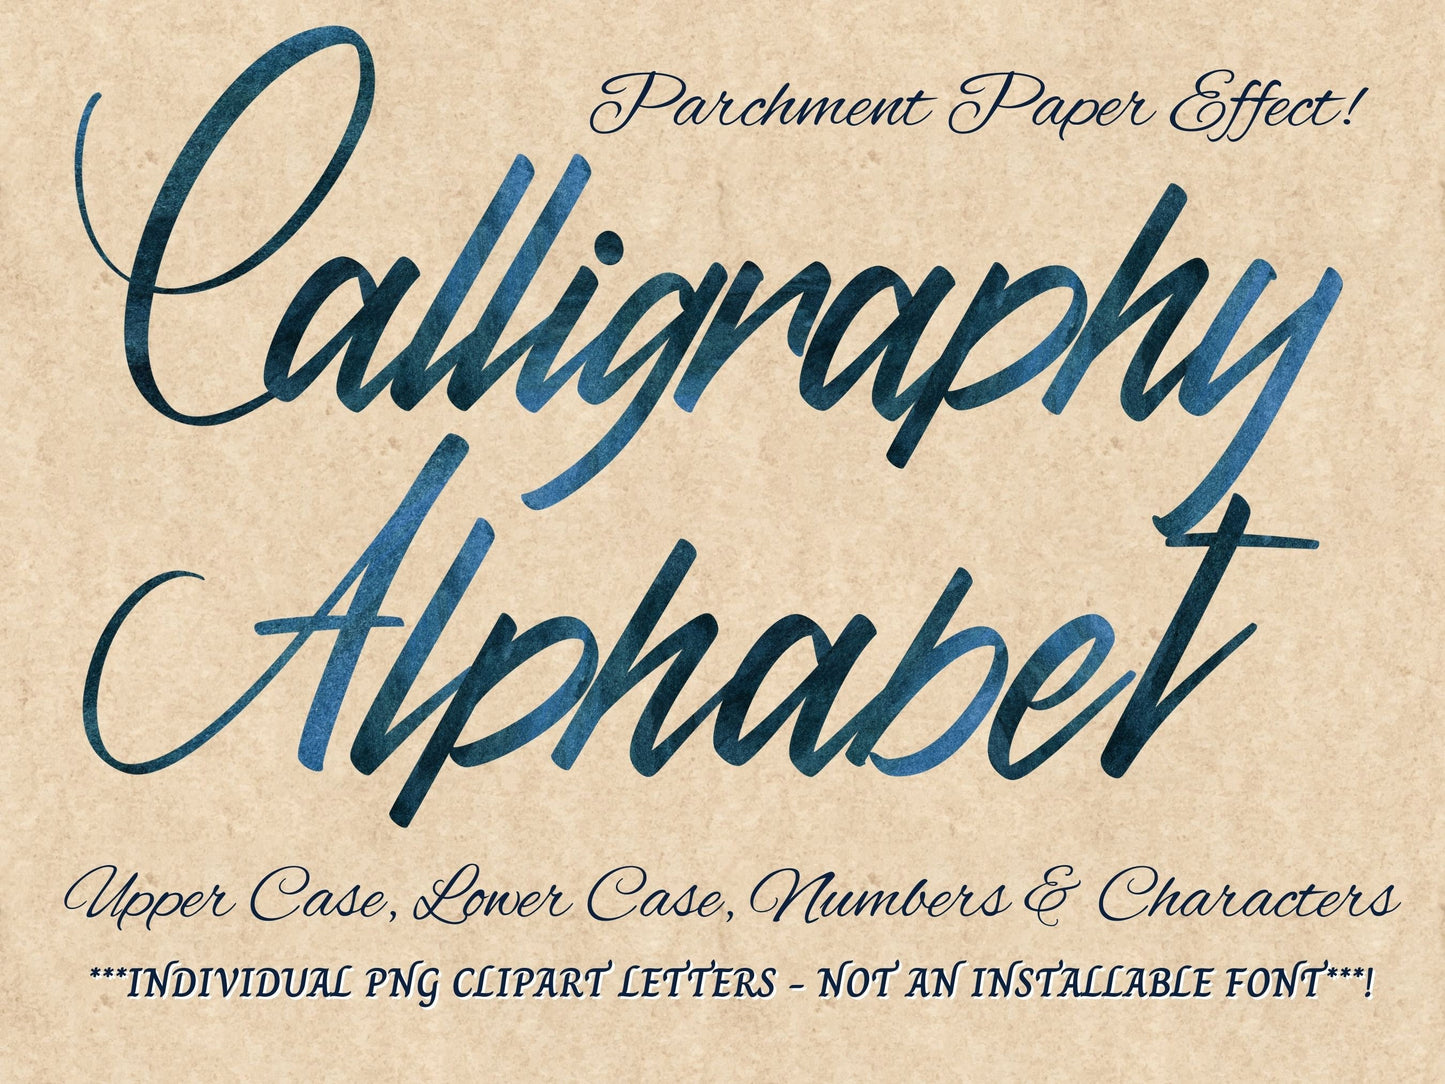 Calligraphy letters for digital art, sublimation designs, wedding invitations, printable letters made with calligraphy font